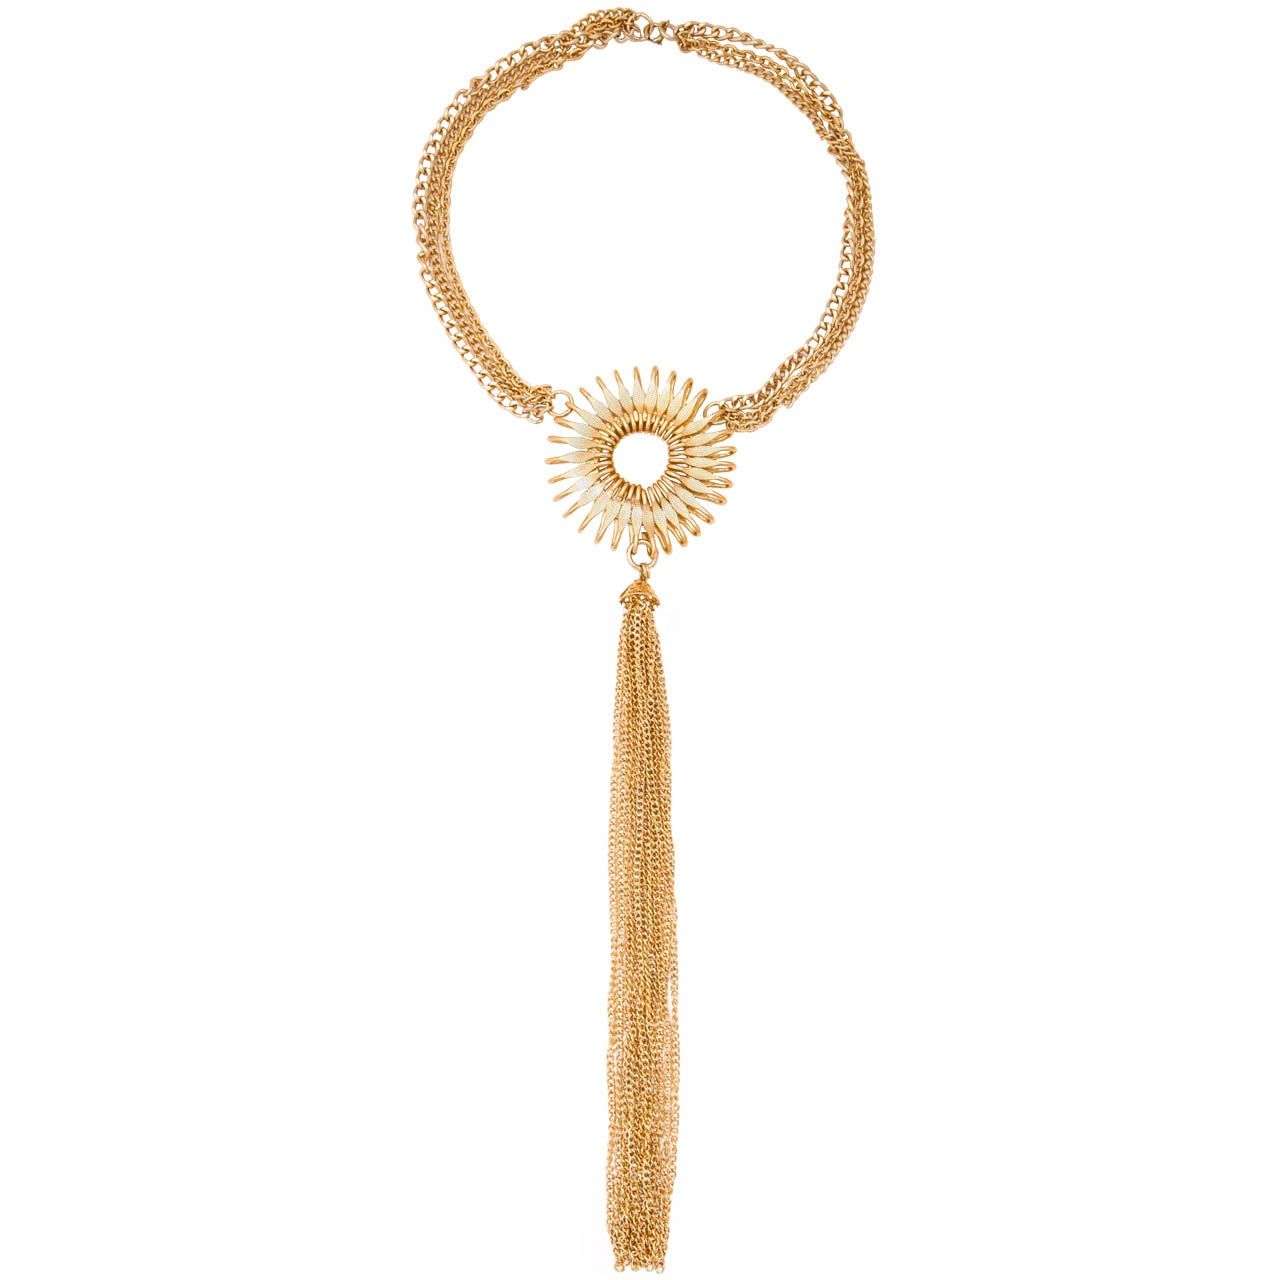 Goldtone Sunburst Necklace with Long Tassel, Costume Jewelry For Sale